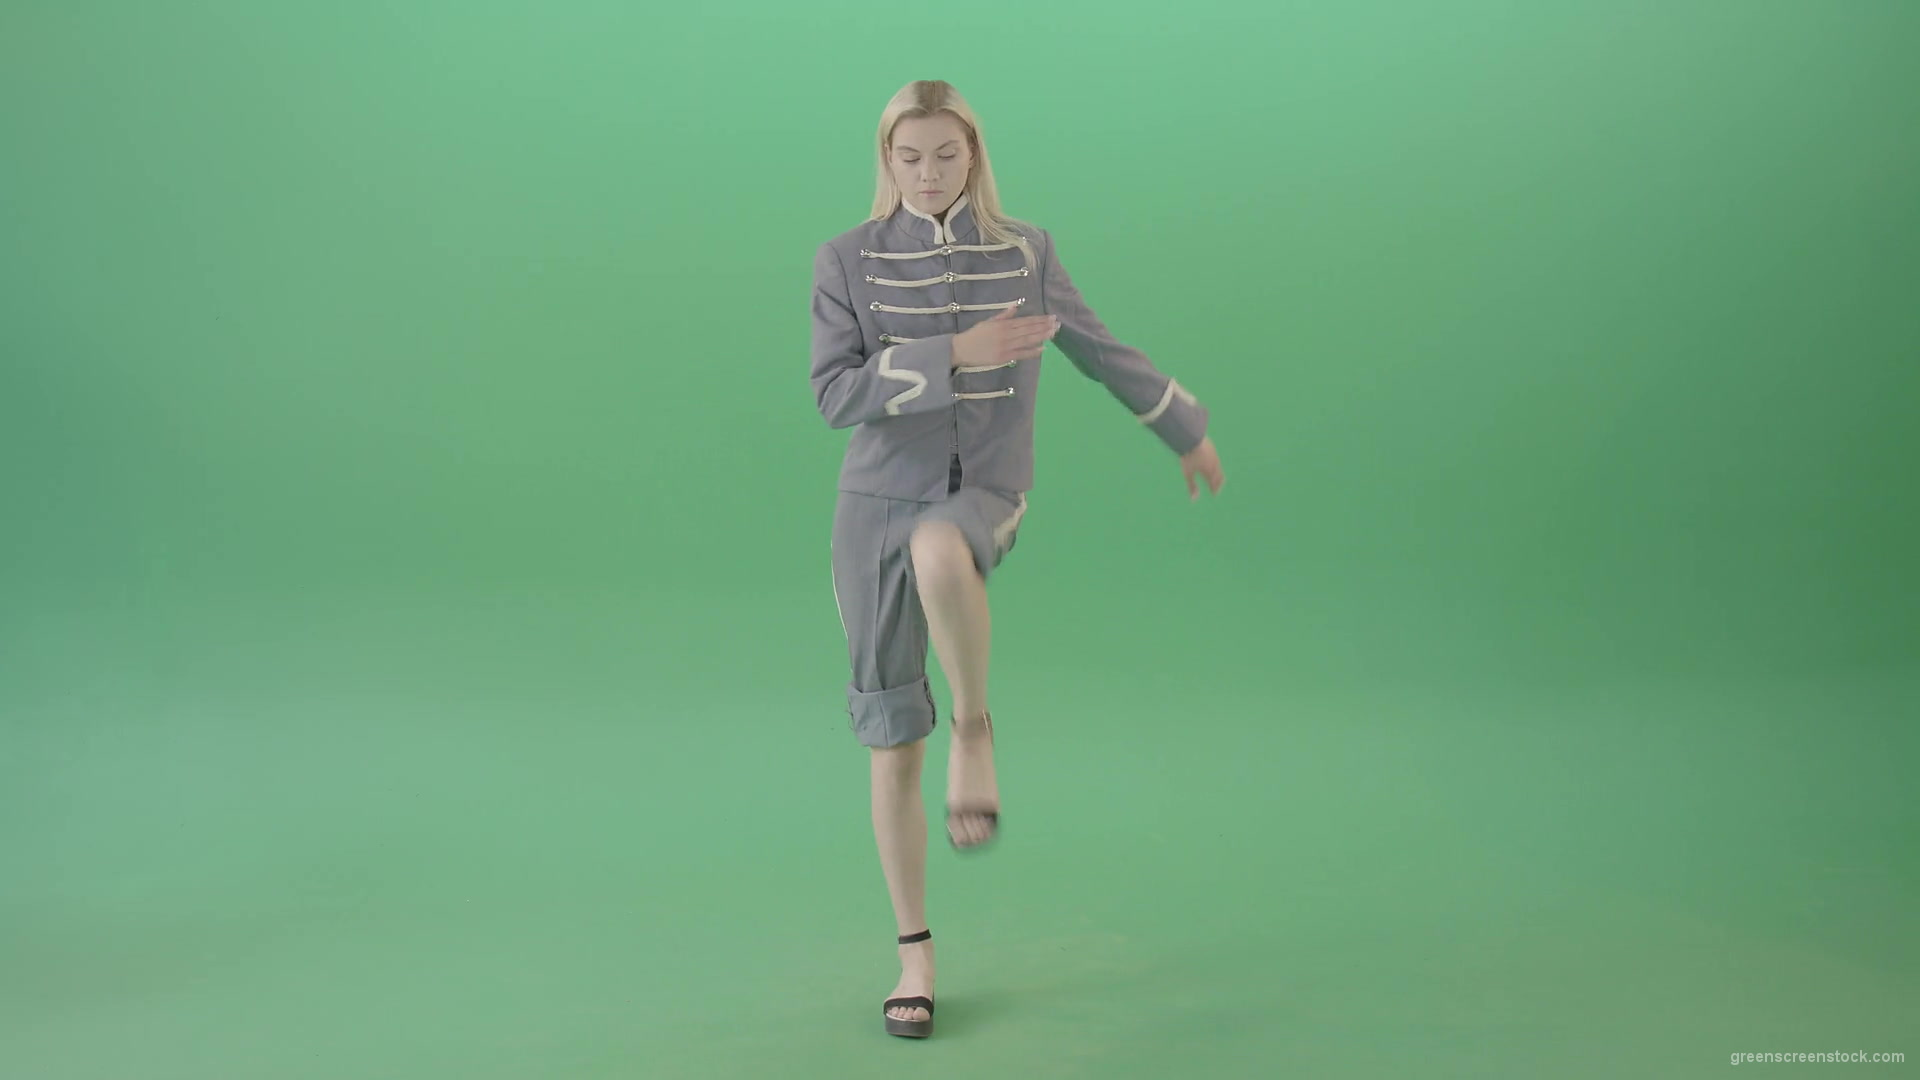 Blonde-Woman-in-blue-military-royal-empire-uniform-marching-on-green-screen-4K-Video-Footage-1920_009 Green Screen Stock